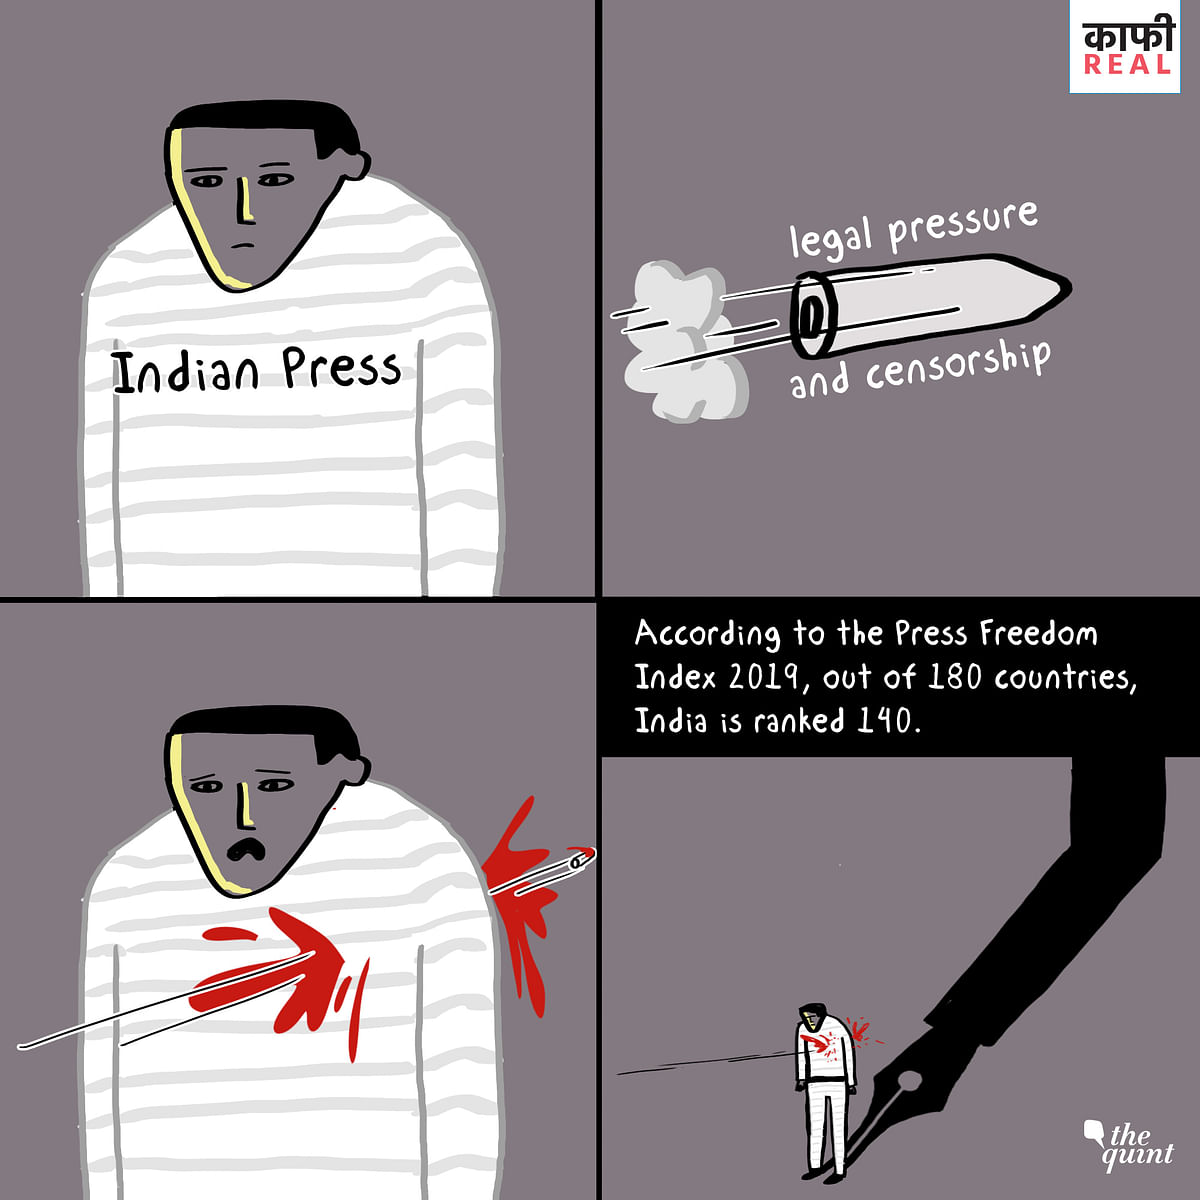 India slipped two places and ranked at 140 among 180 countries in the World Press Freedom Index.